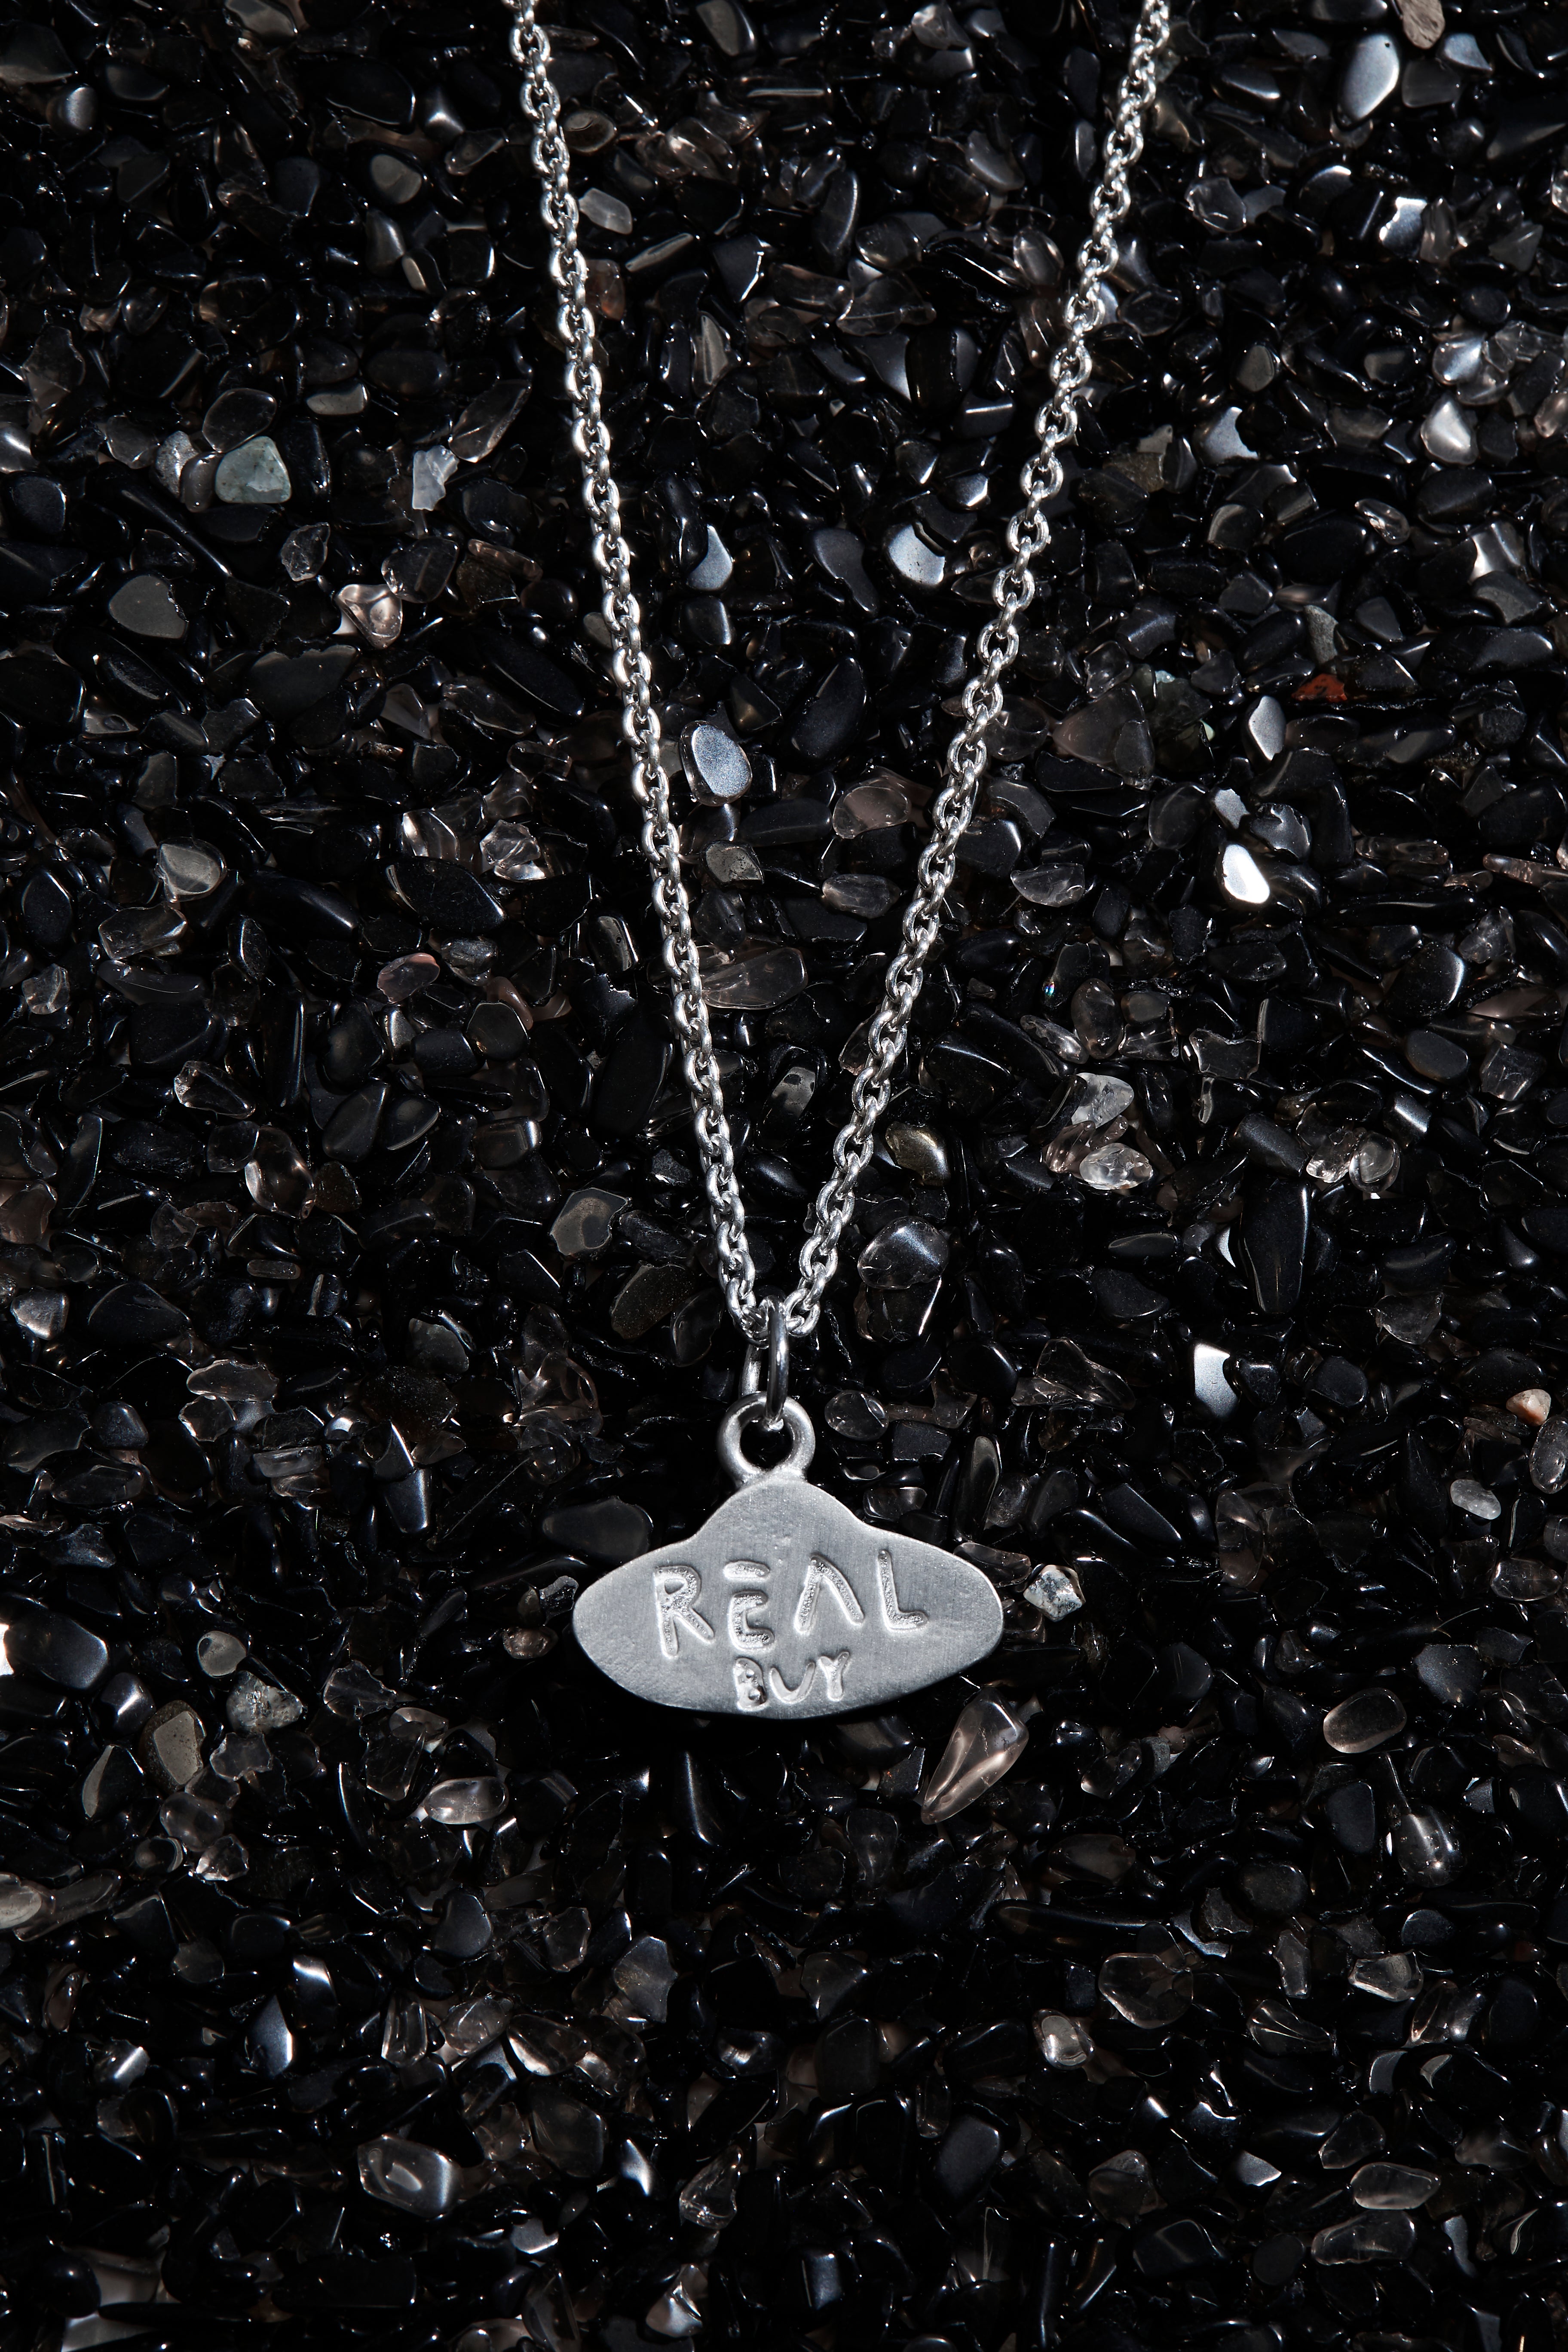 THE REAL BUY X WWW. WILL SHOTT STERLING SILVER UFO NECKLACE - Trendy Maker